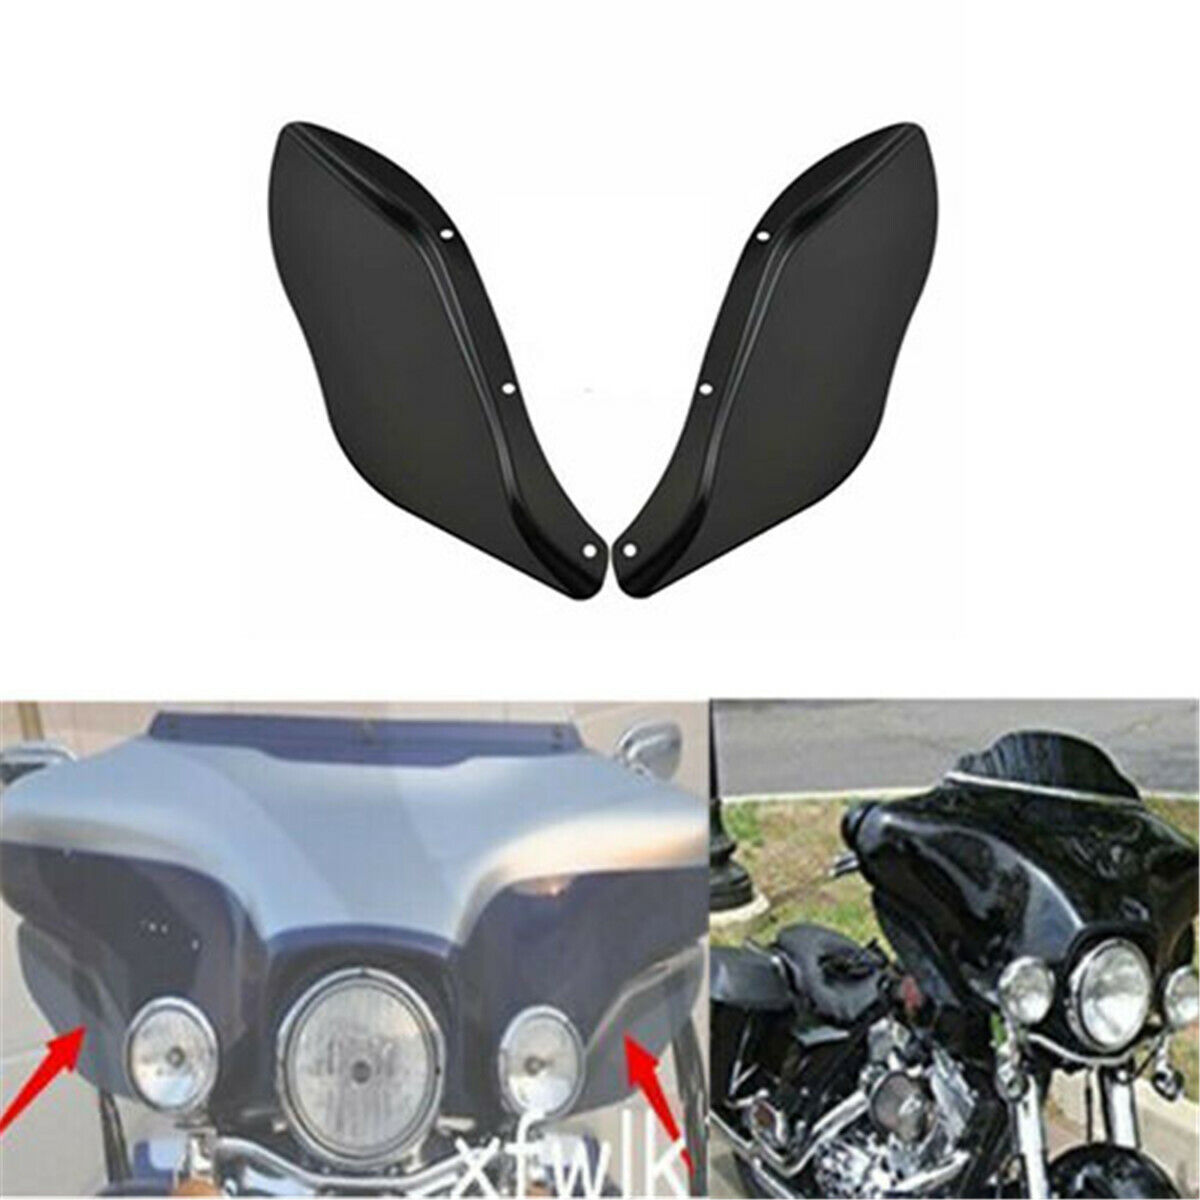 Nrpfell 2 Pcs Fairing Air Deflectors Side Wings Windshield Side Cover Shield for 1996-2013 Touring Electra/Street/Tri Glide CVO 